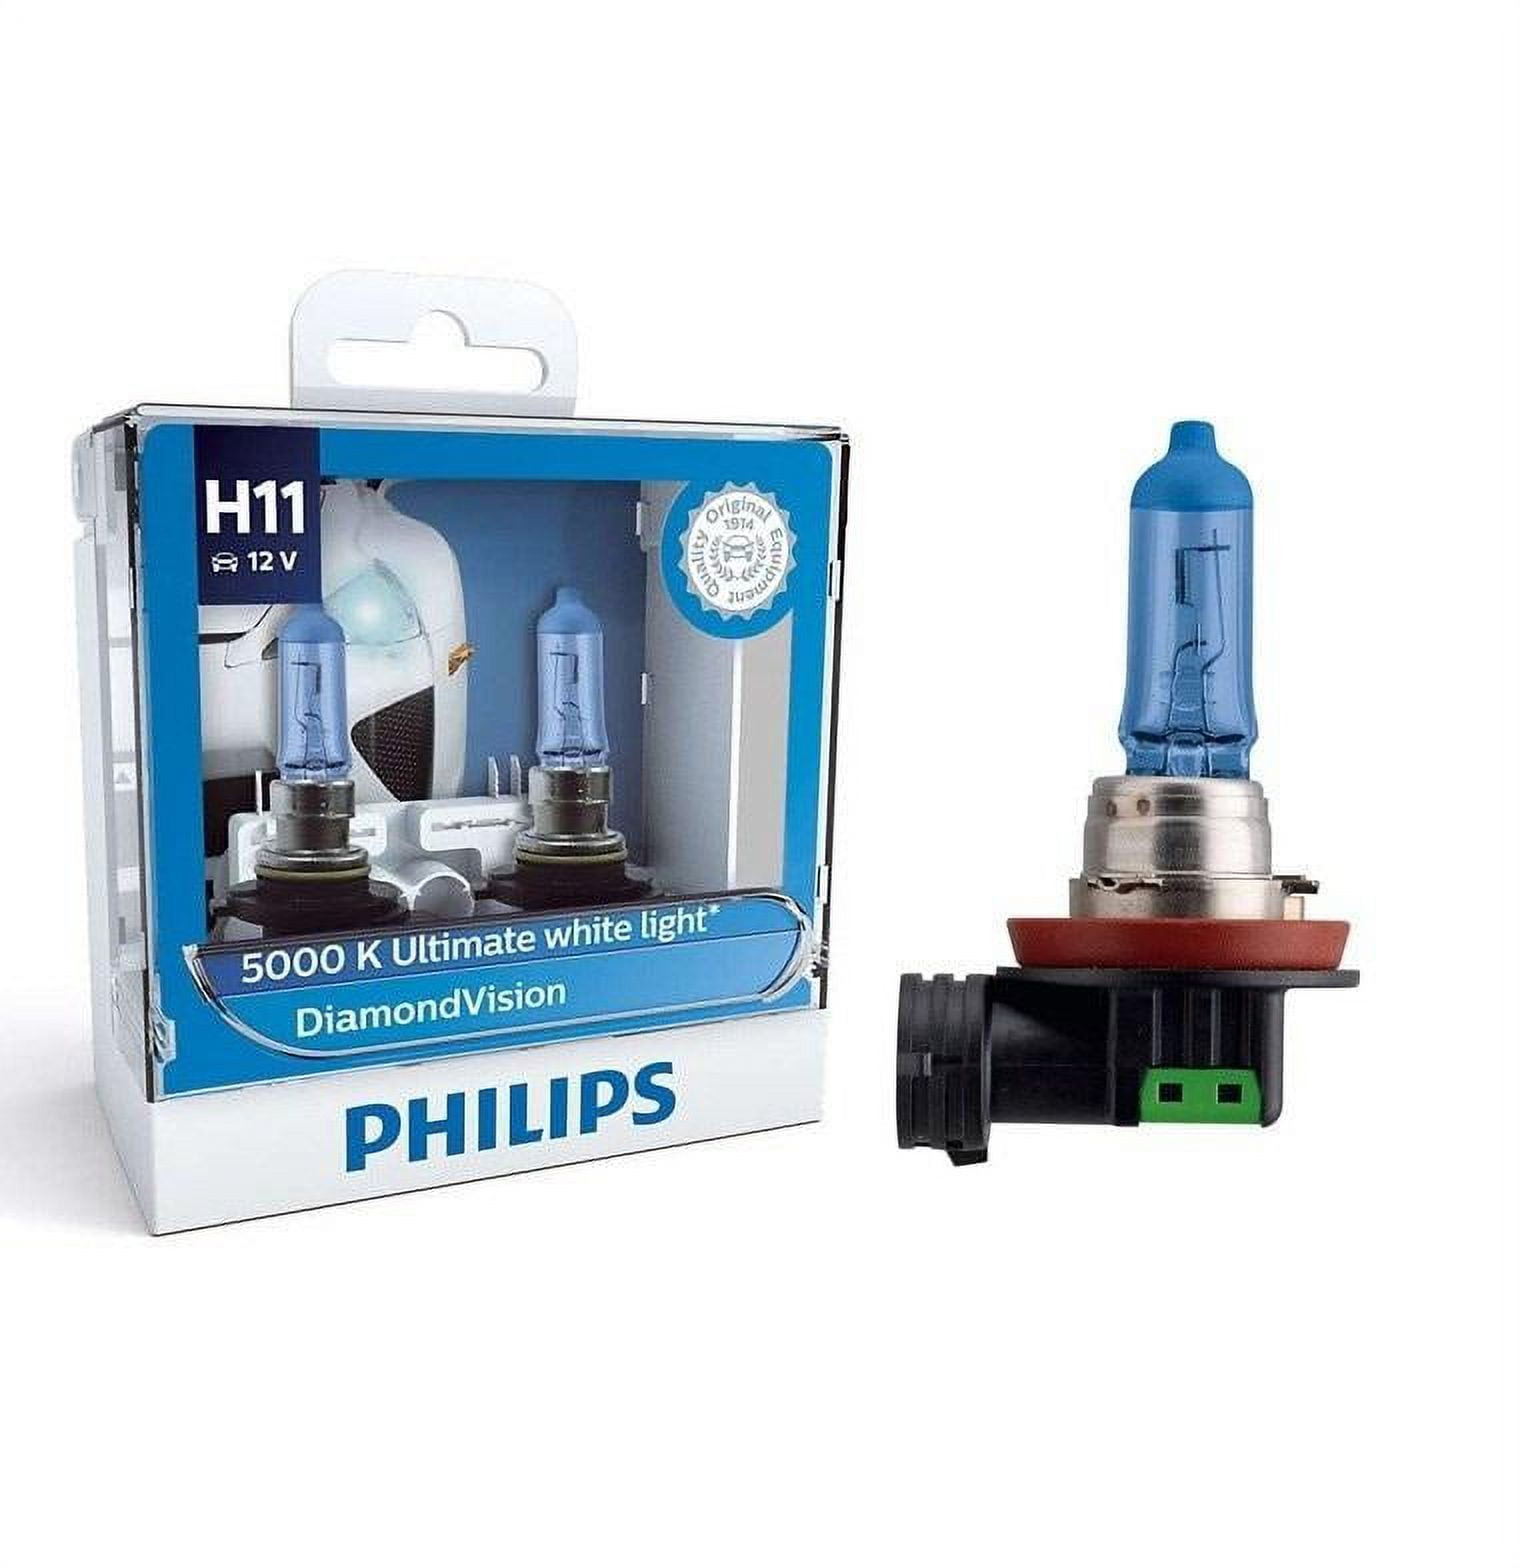 Ampoule H11 PGJ19-2 55W 12V 501311 PHILIPS 12362 - OSRAM 64211